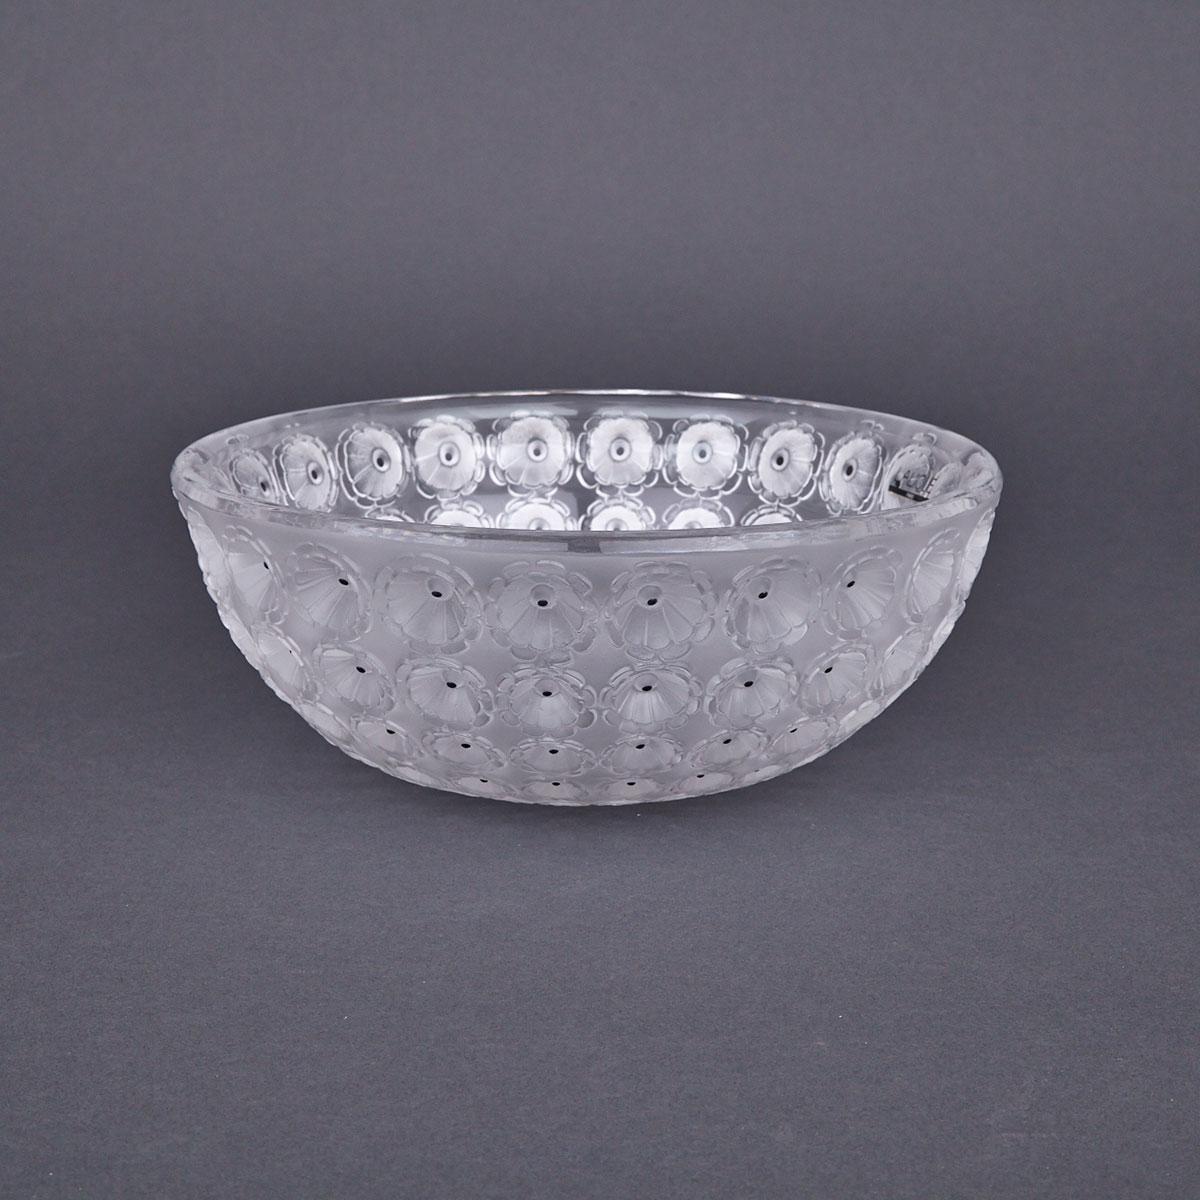 ‘Nemours’, Lalique Frosted and Enameled Glass Bowl, post-1978